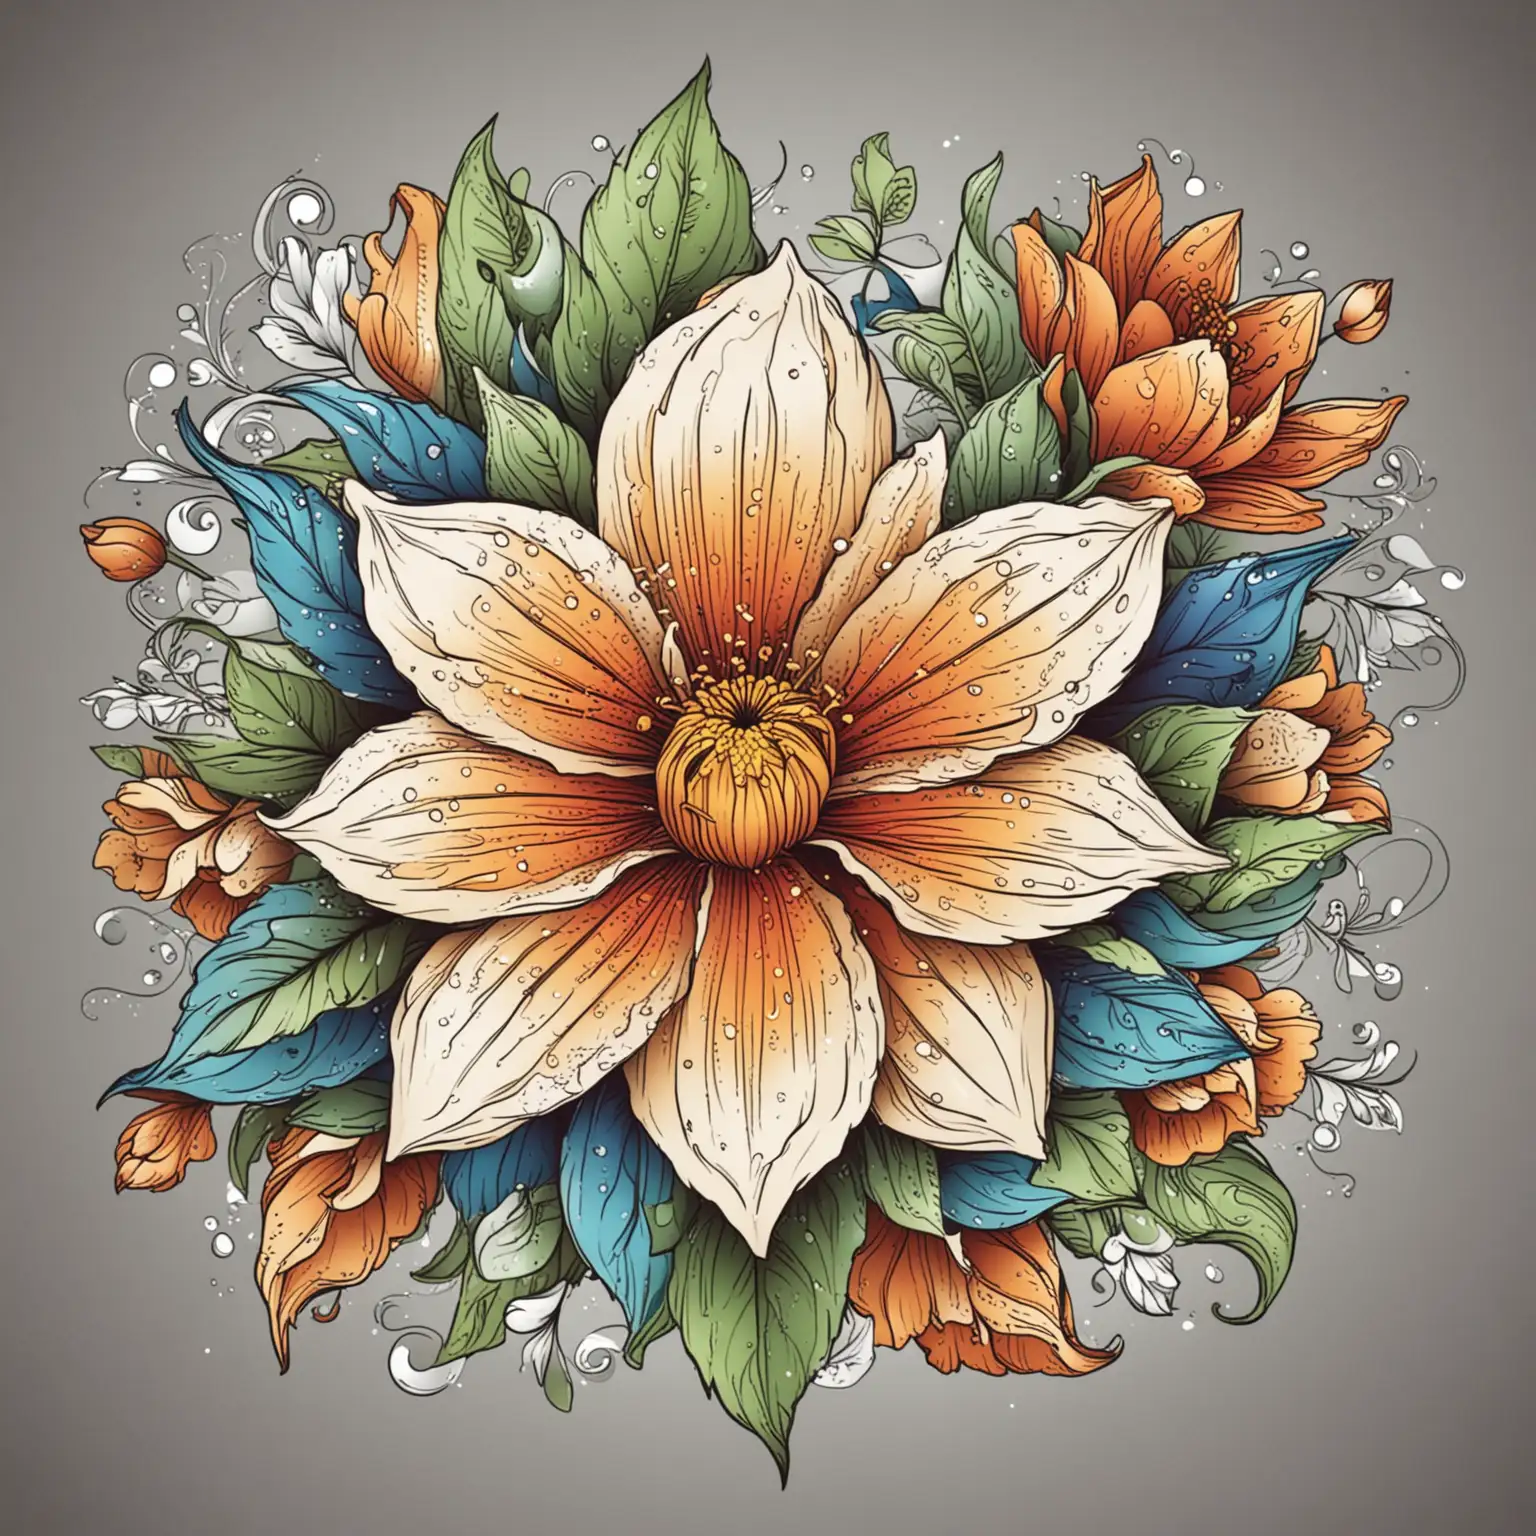 provide a beautiful flower for a coloring book cover